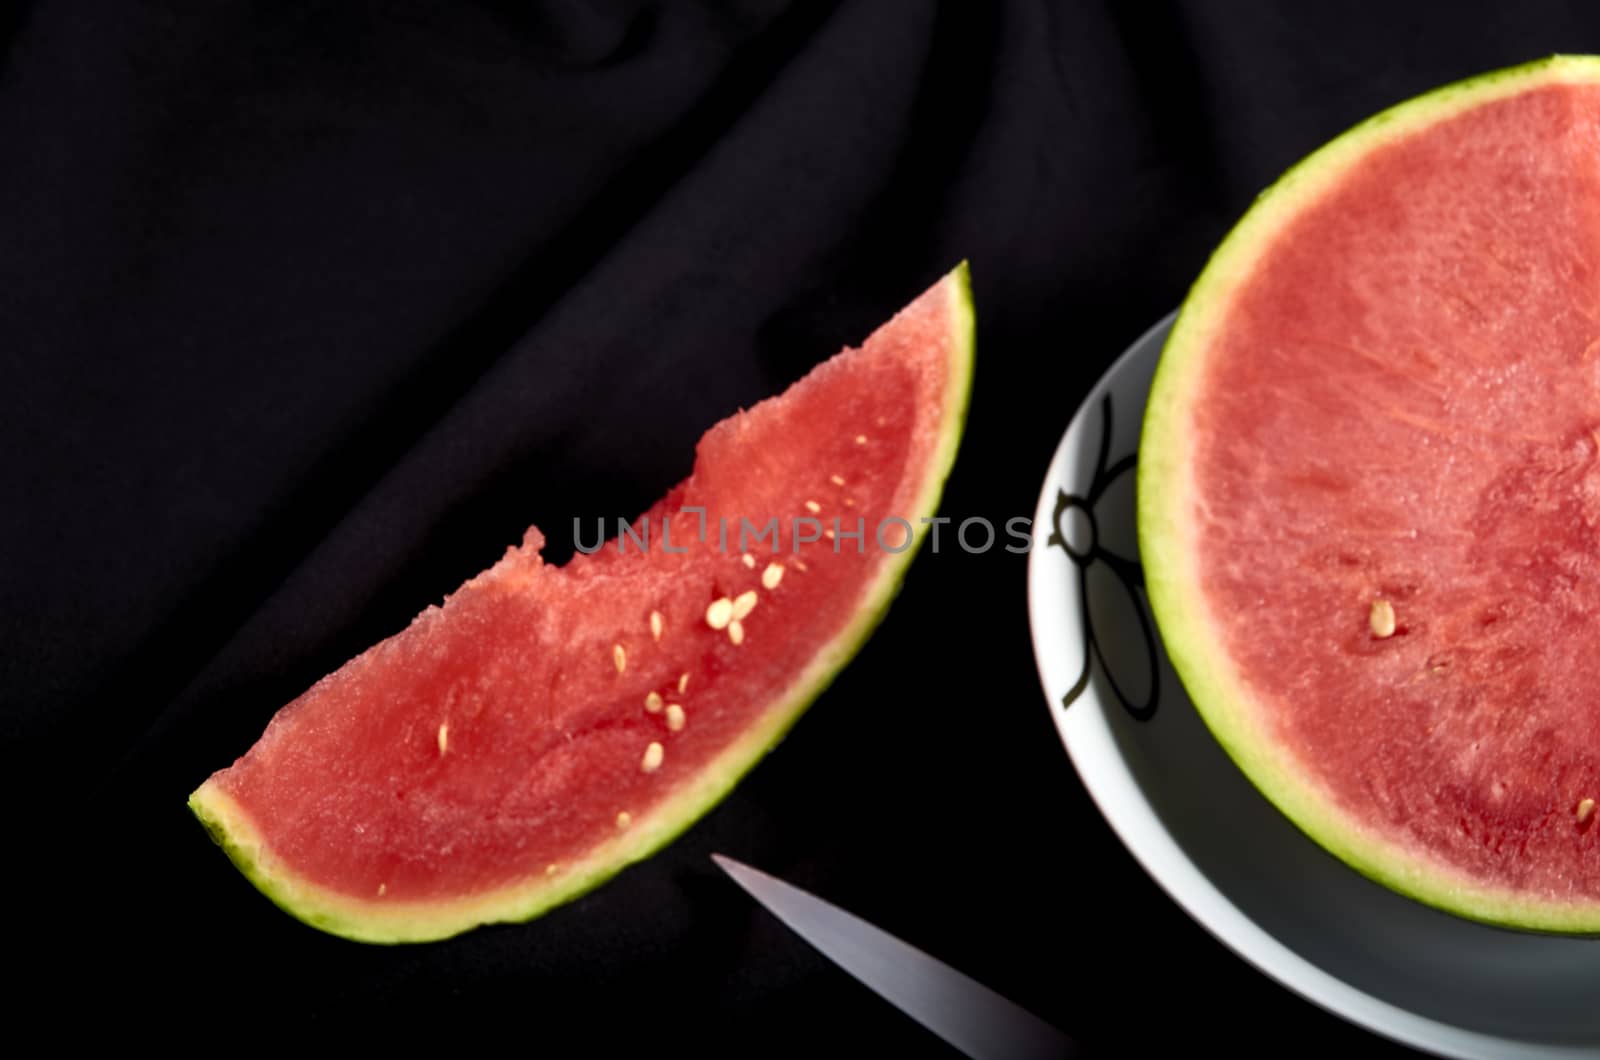 Image slice of watermelon with bite black background